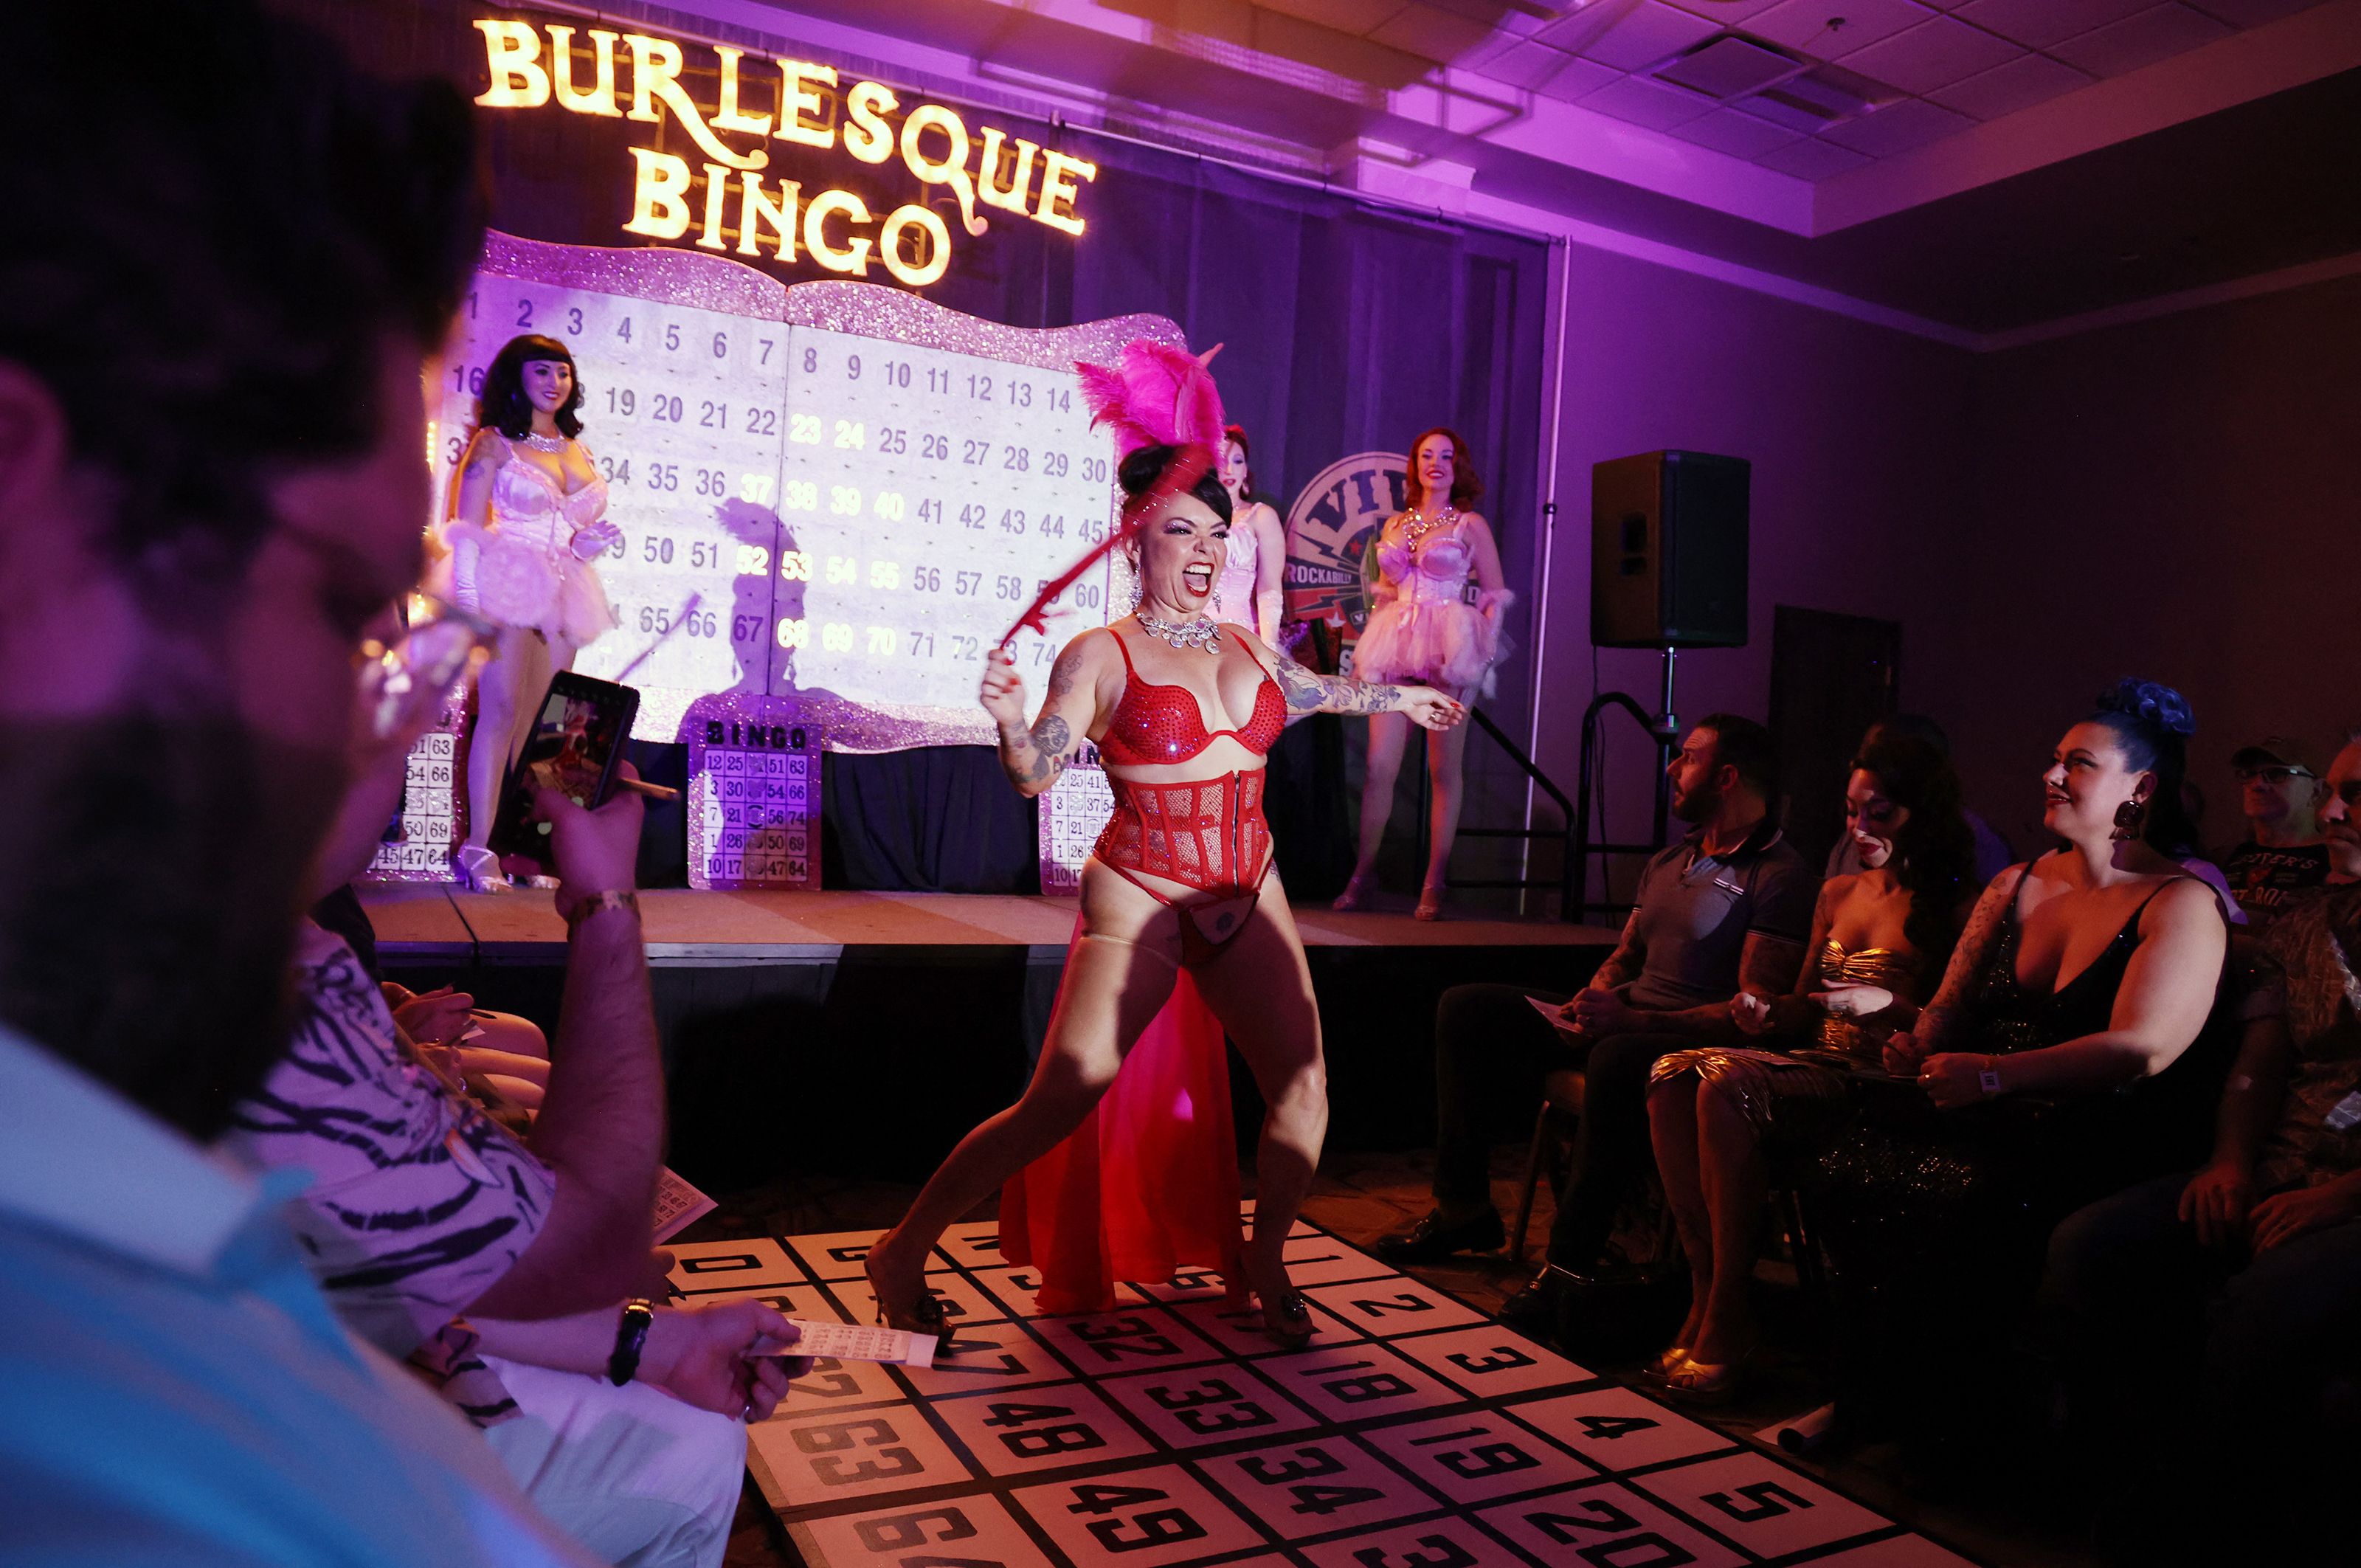 Costumed performers on a stage dance in front of a giant bingo card.